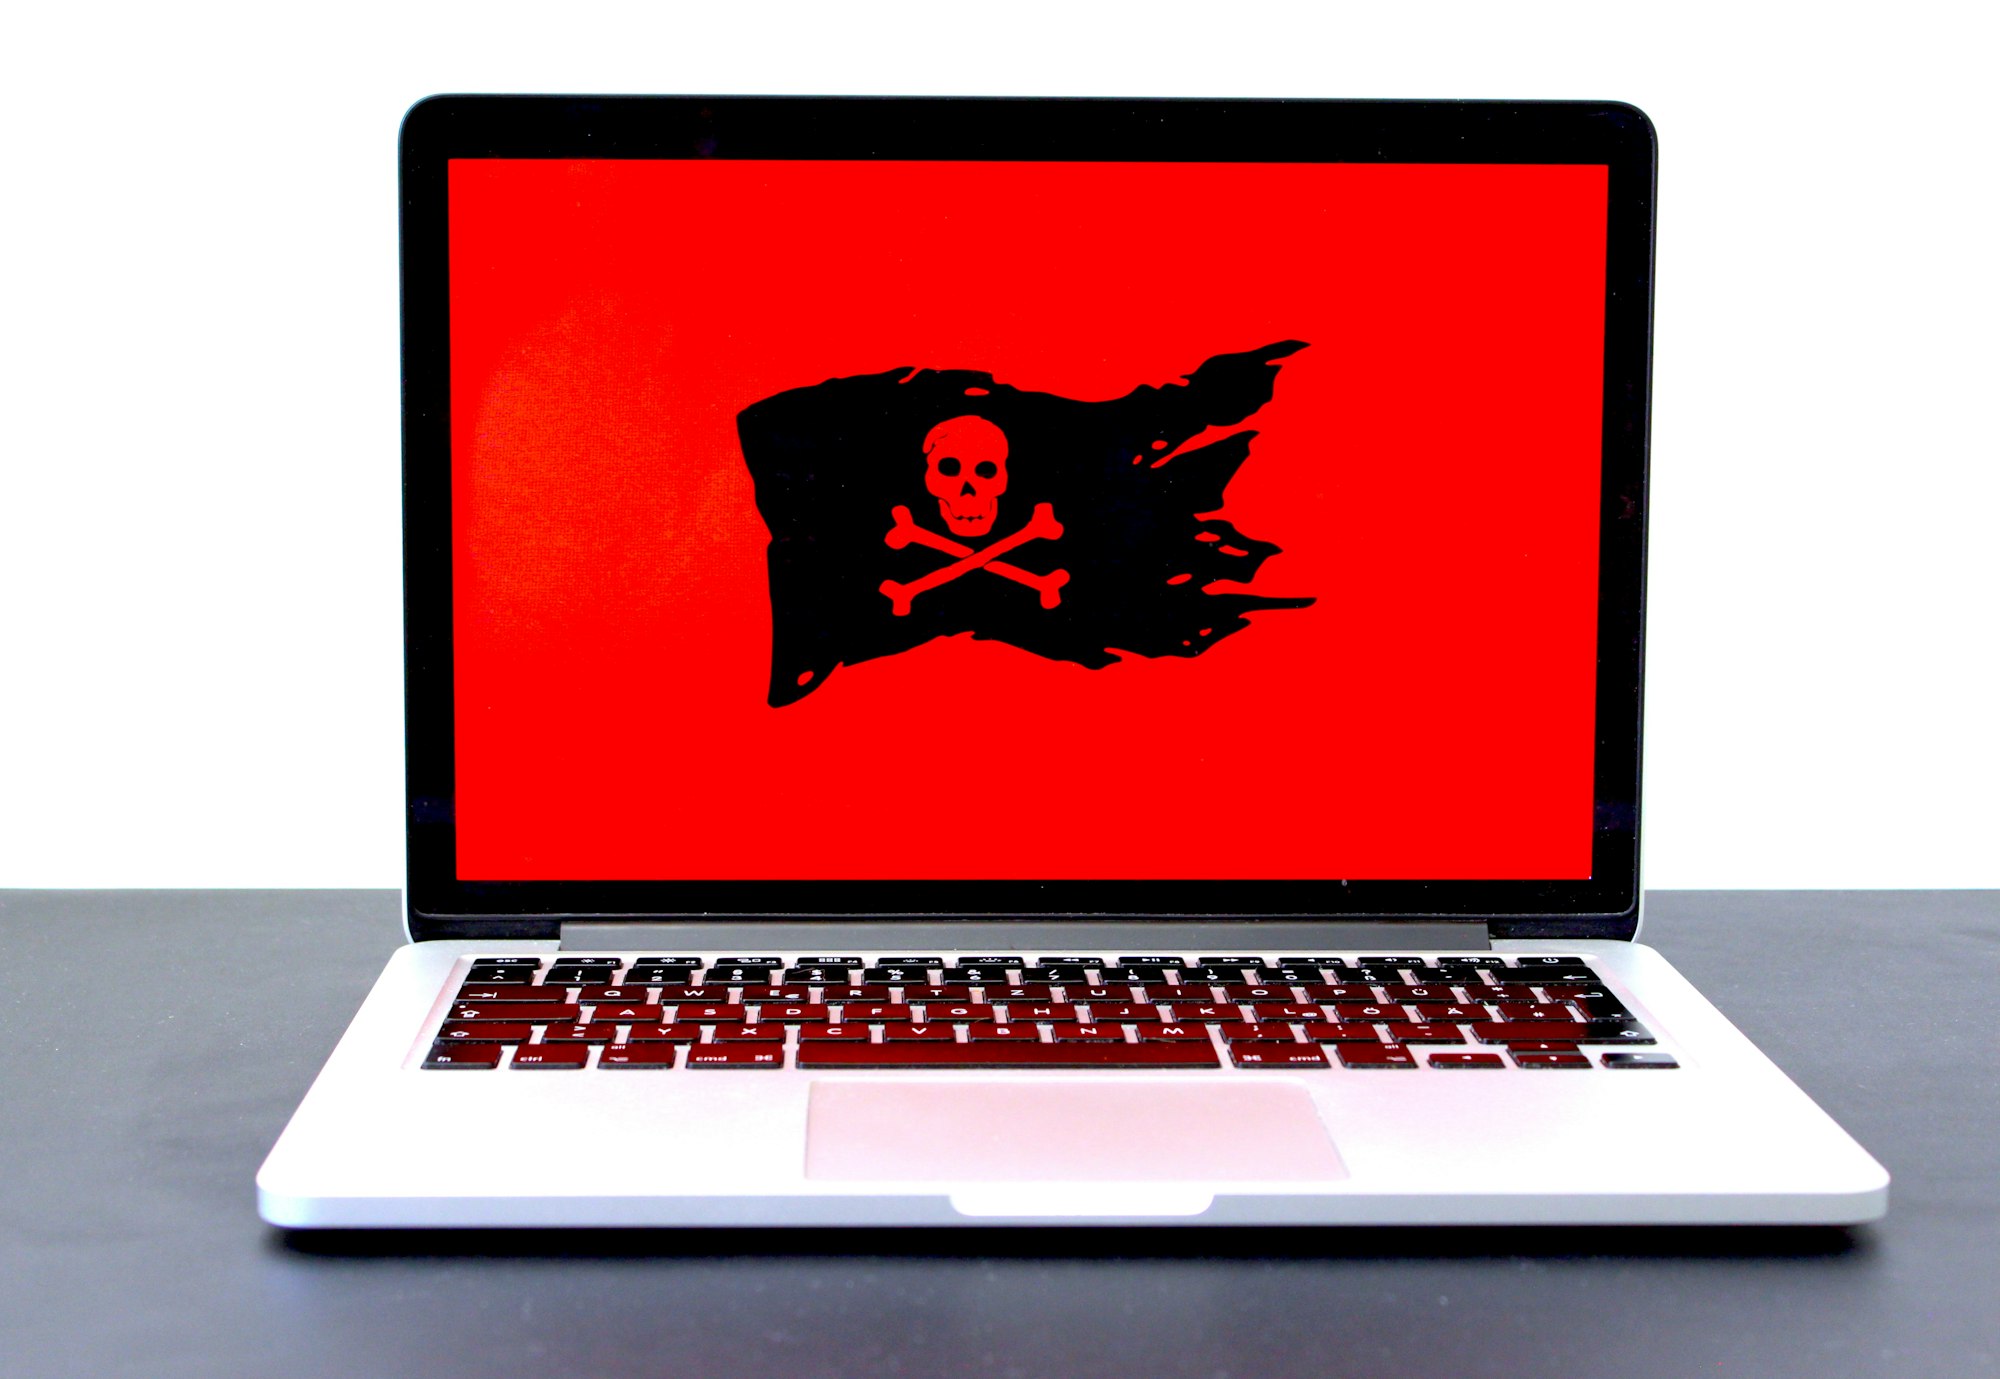 Ransomware: The Digital Kidnapping Epidemic (and How to Protect Yourself)